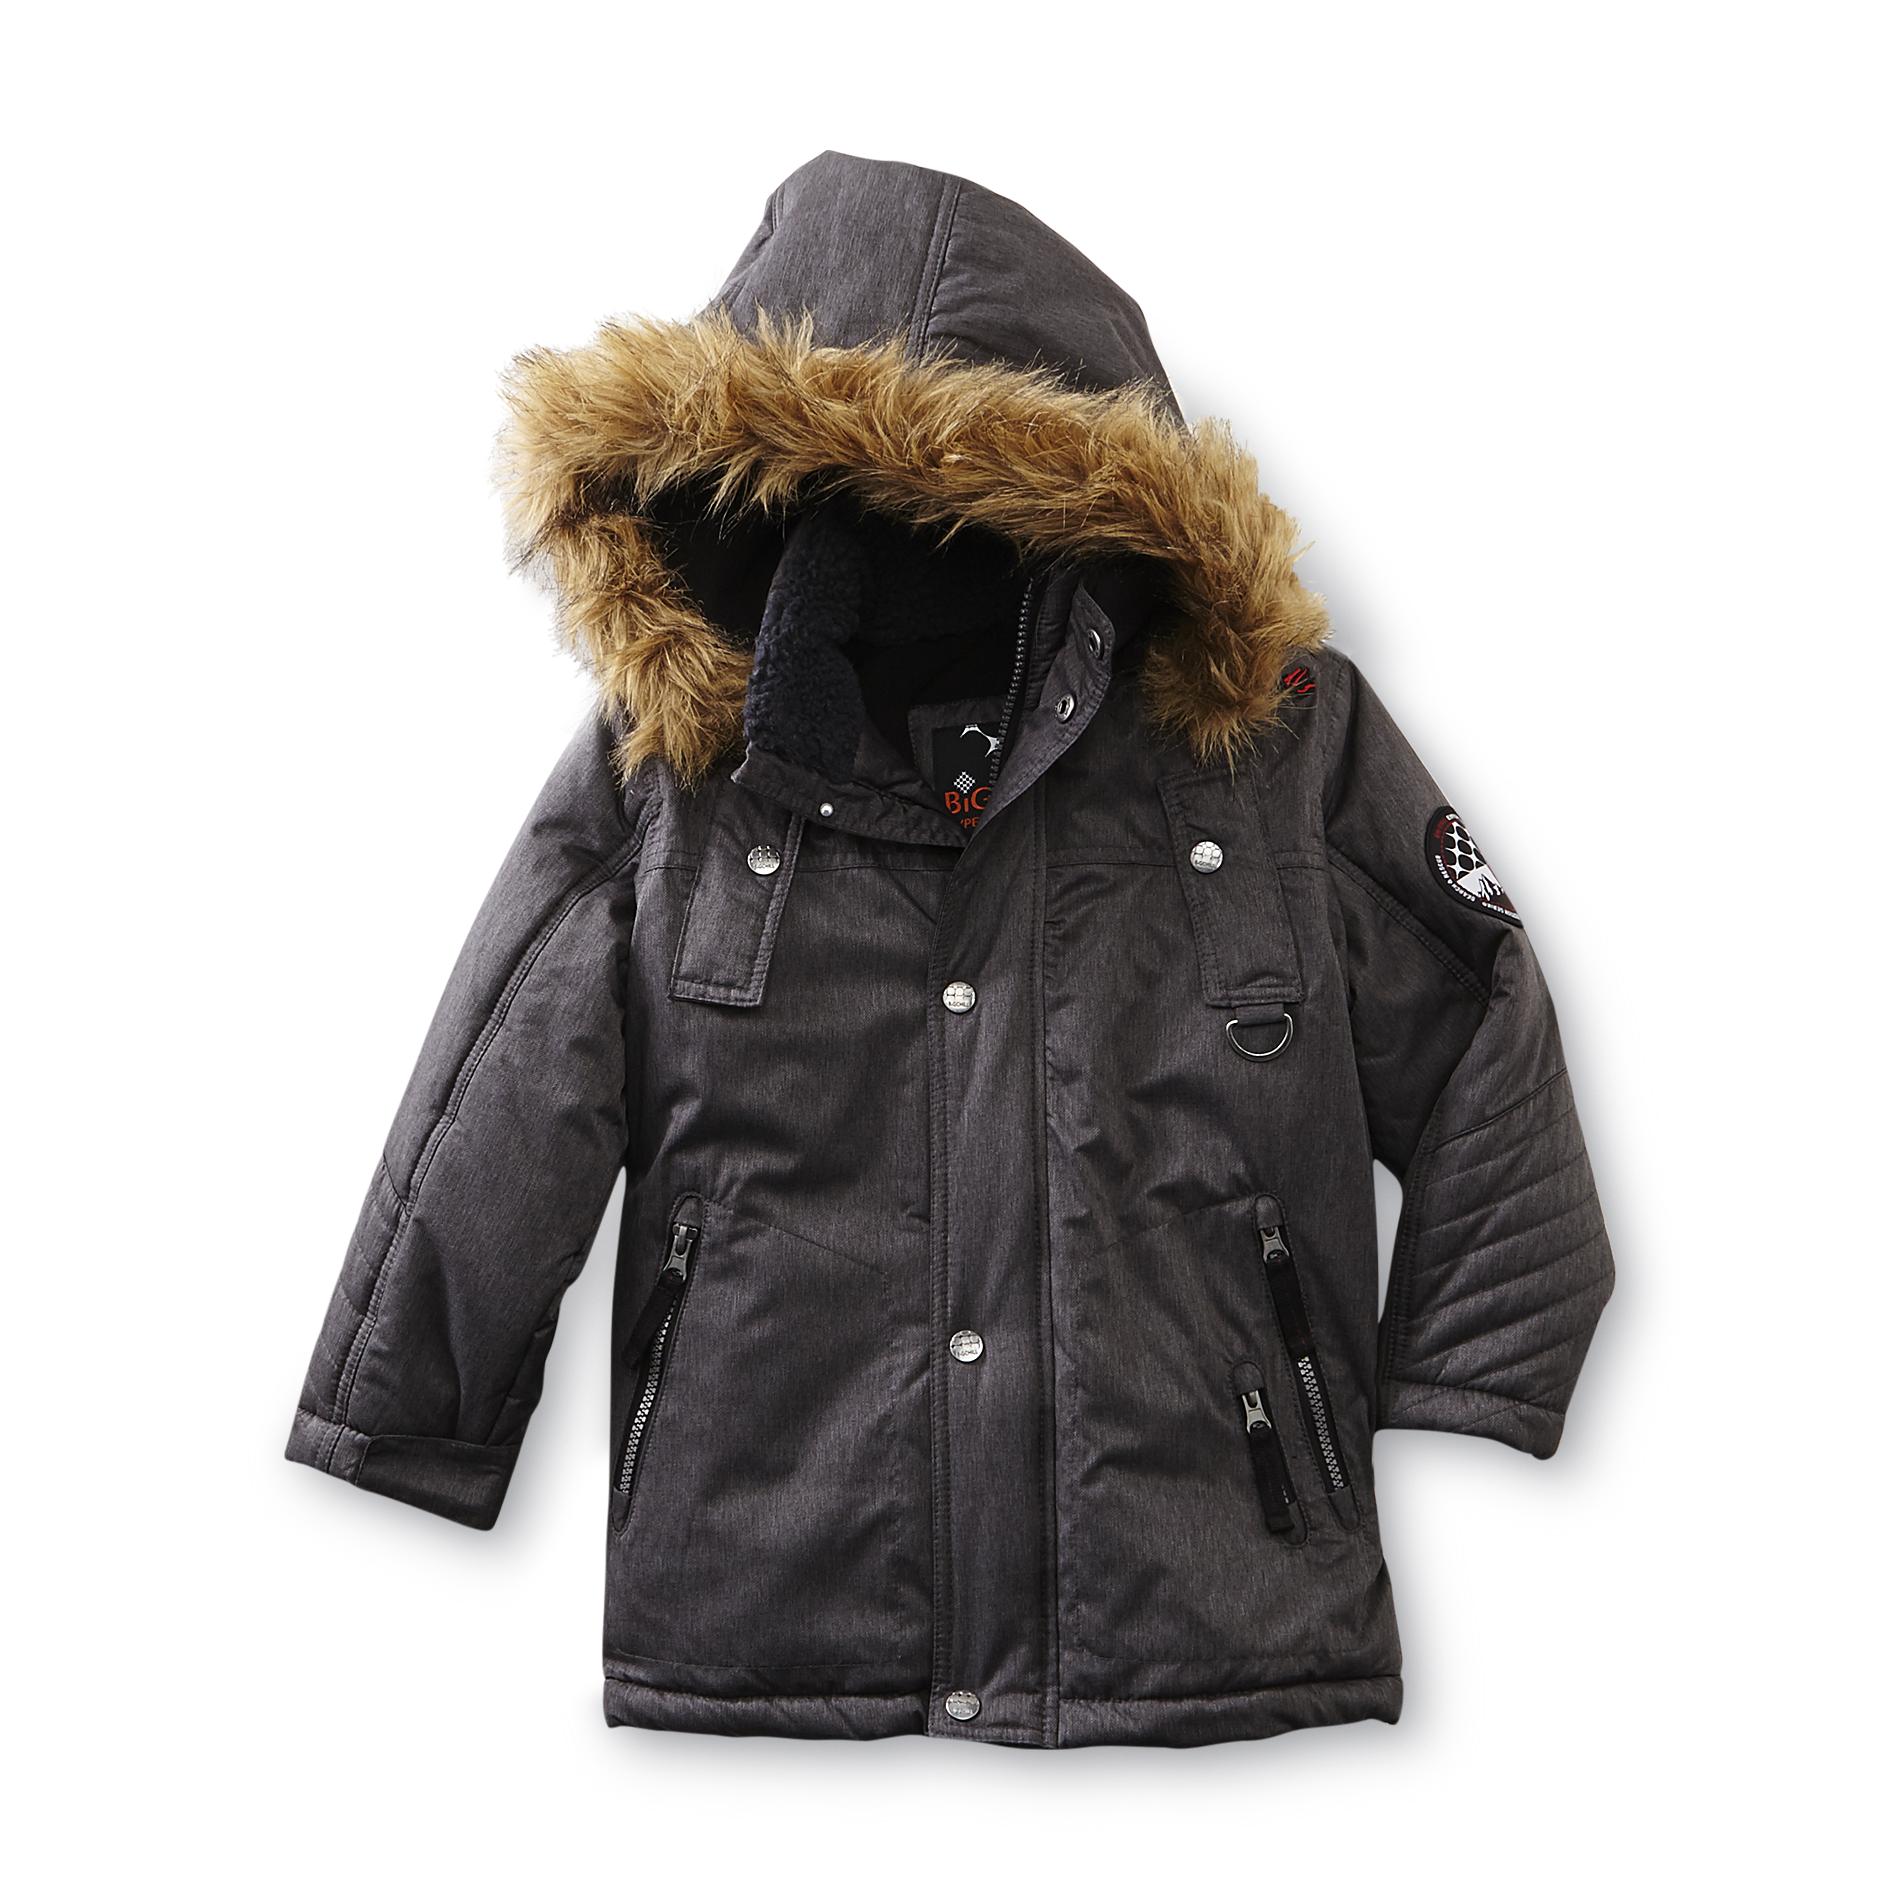 Big Chill Boy's Insulated Hooded Winter Coat